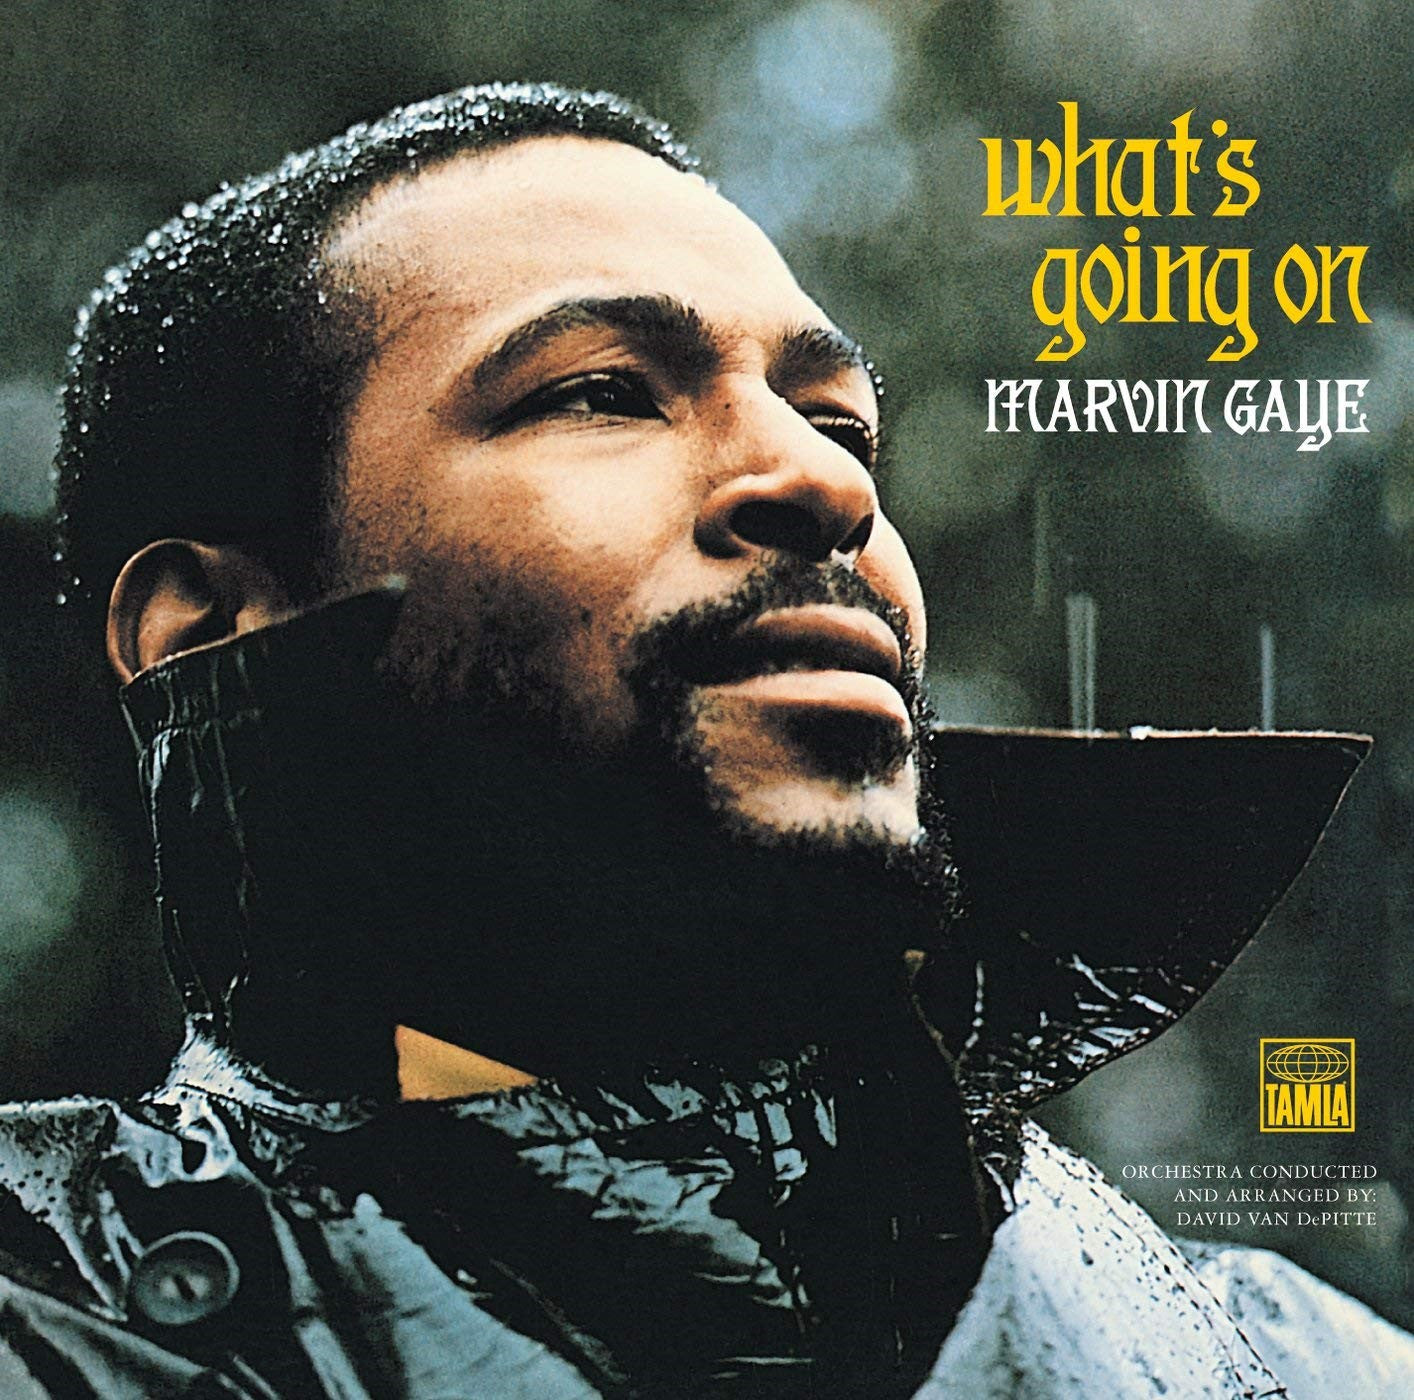 MARVIN GAYE - WHAT'S GOING ON - VINYL LP - Wah Wah Records